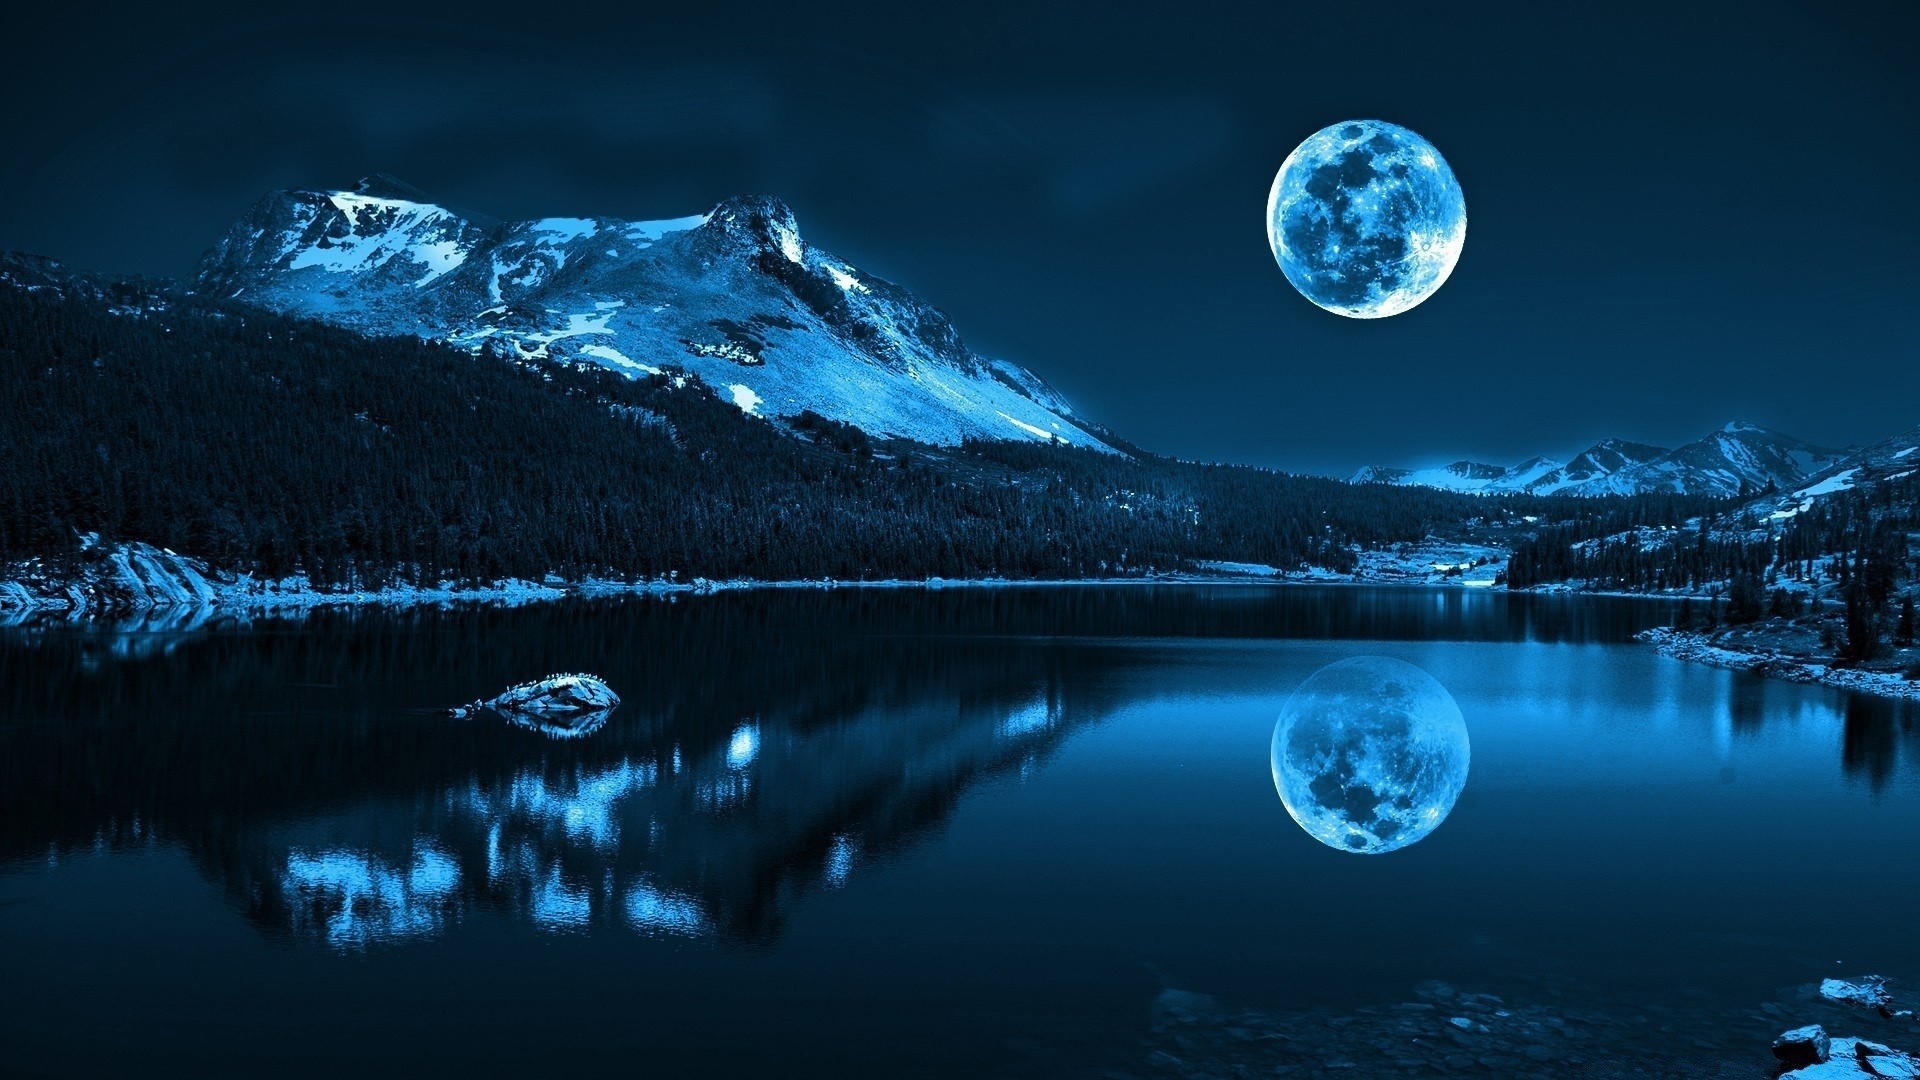 creative moon travel sky water snow nature reflection dawn landscape evening light sun science outdoors astronomy planet winter